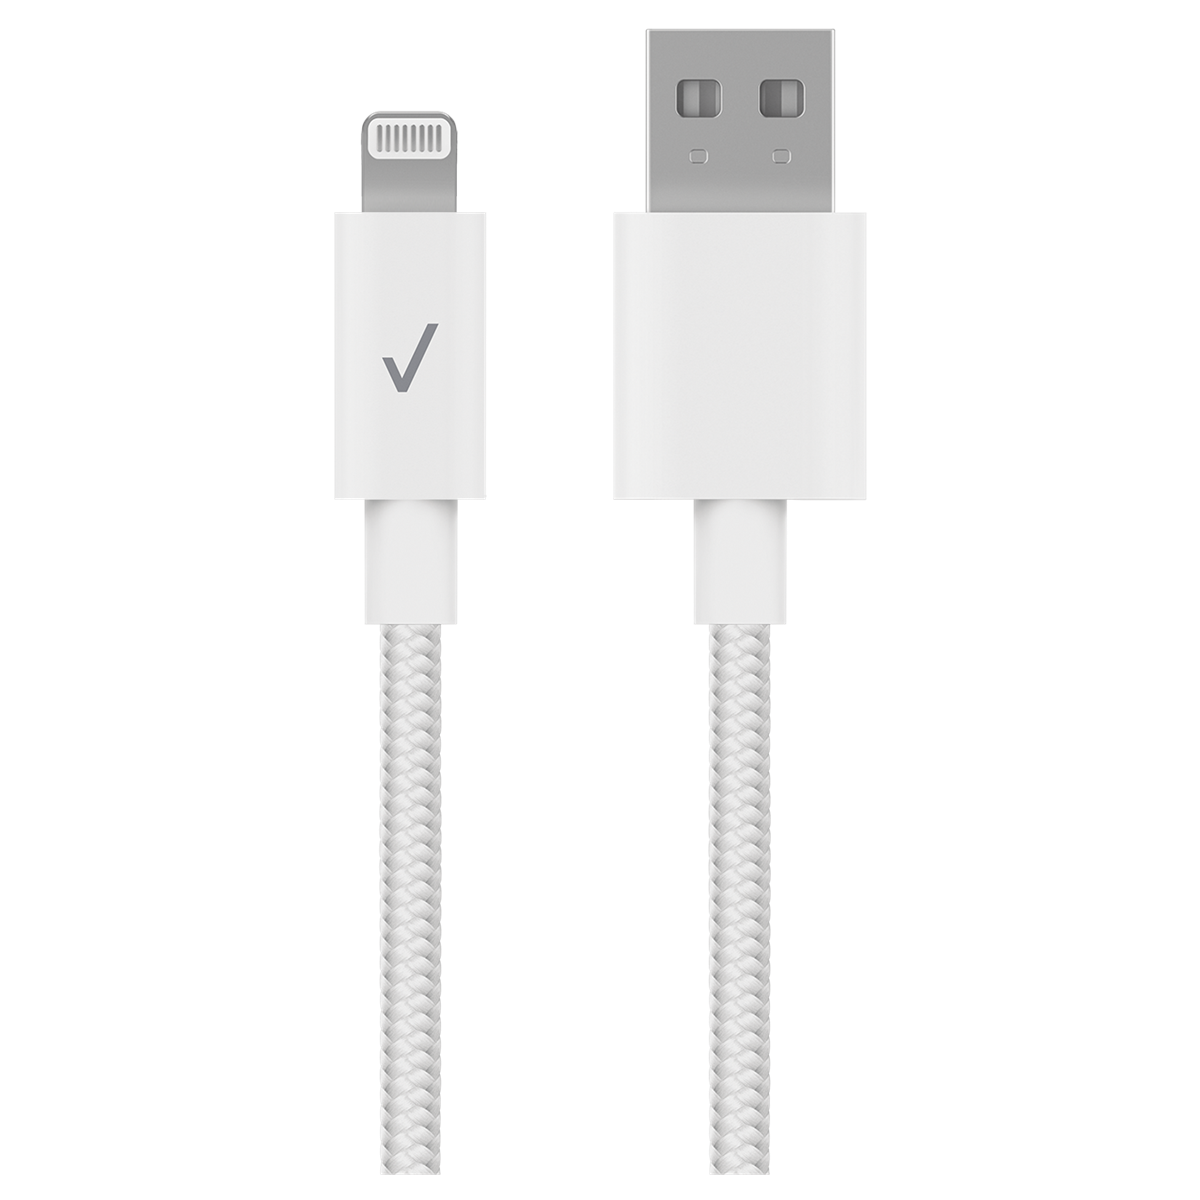 New images show braided USB-C to Lightning cable, potentially for 'iPhone 12